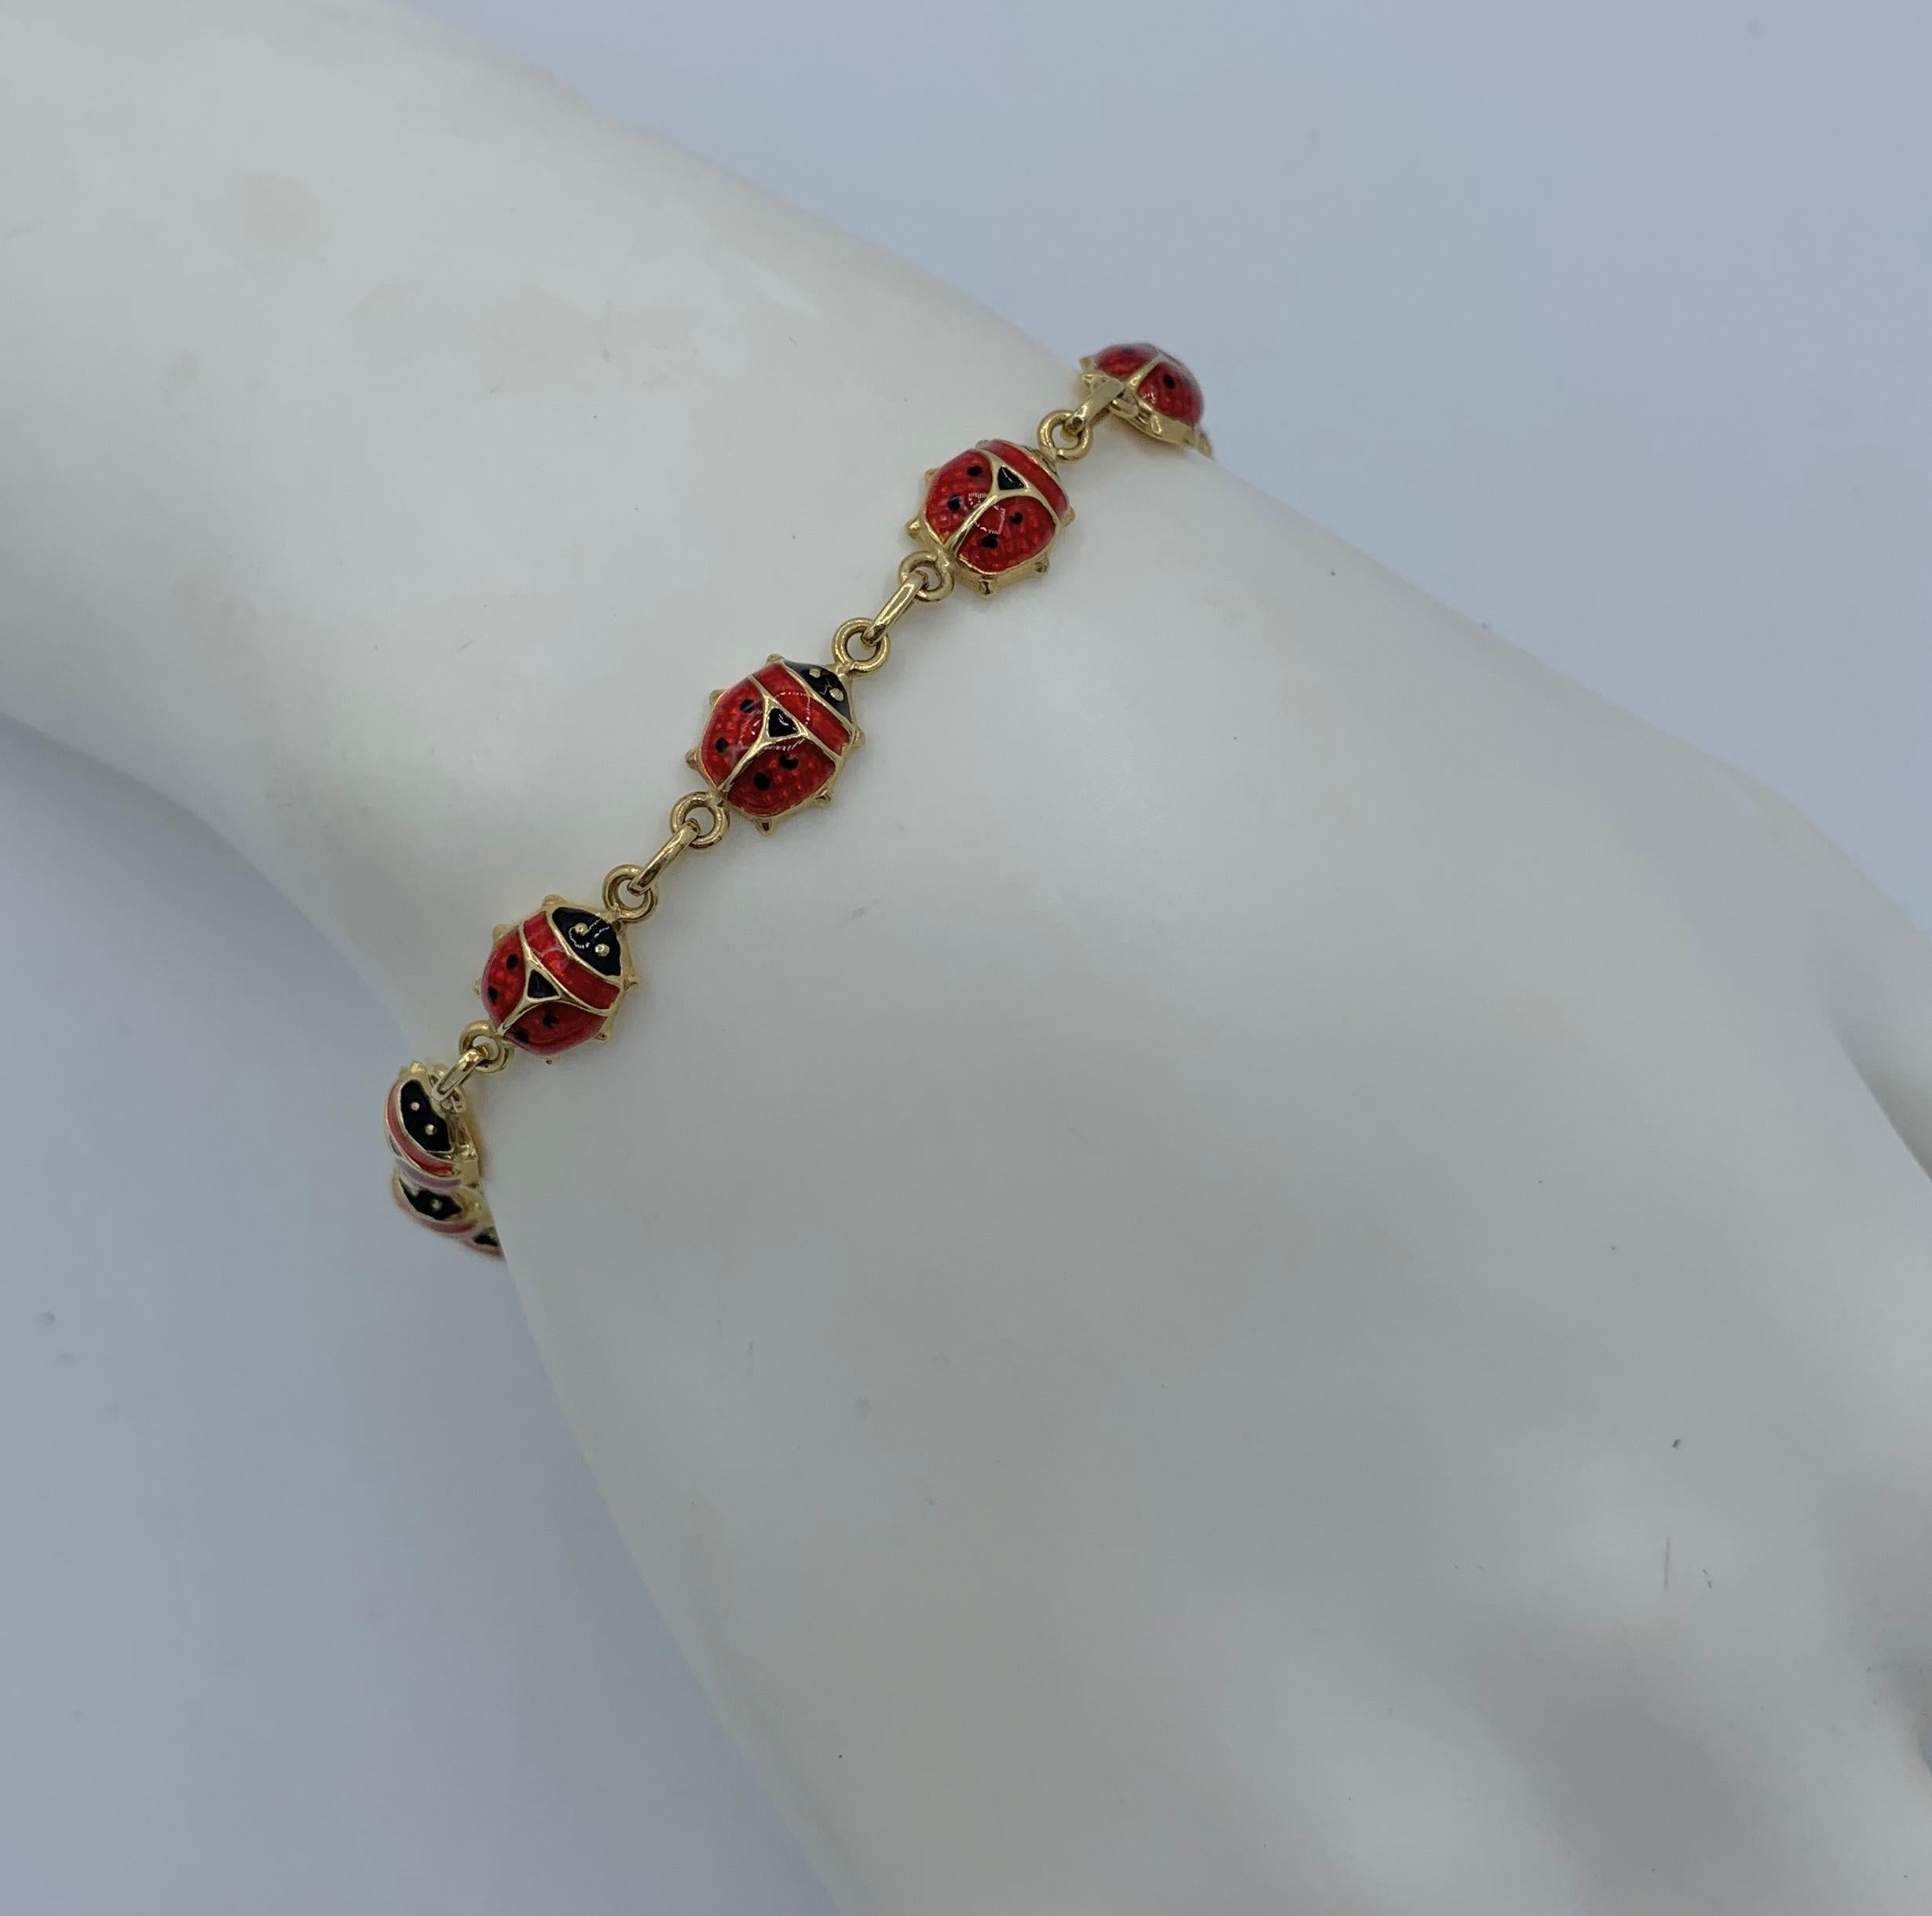 These are absolutely delightful 14 Karat Gold and Enamel Ladybug Earrings and matching Bracelet.  The ladybugs are adorable and done with red and black enamel on 14 Karat Gold.  The work is exquisite.  The jewels are beautifully made.  This